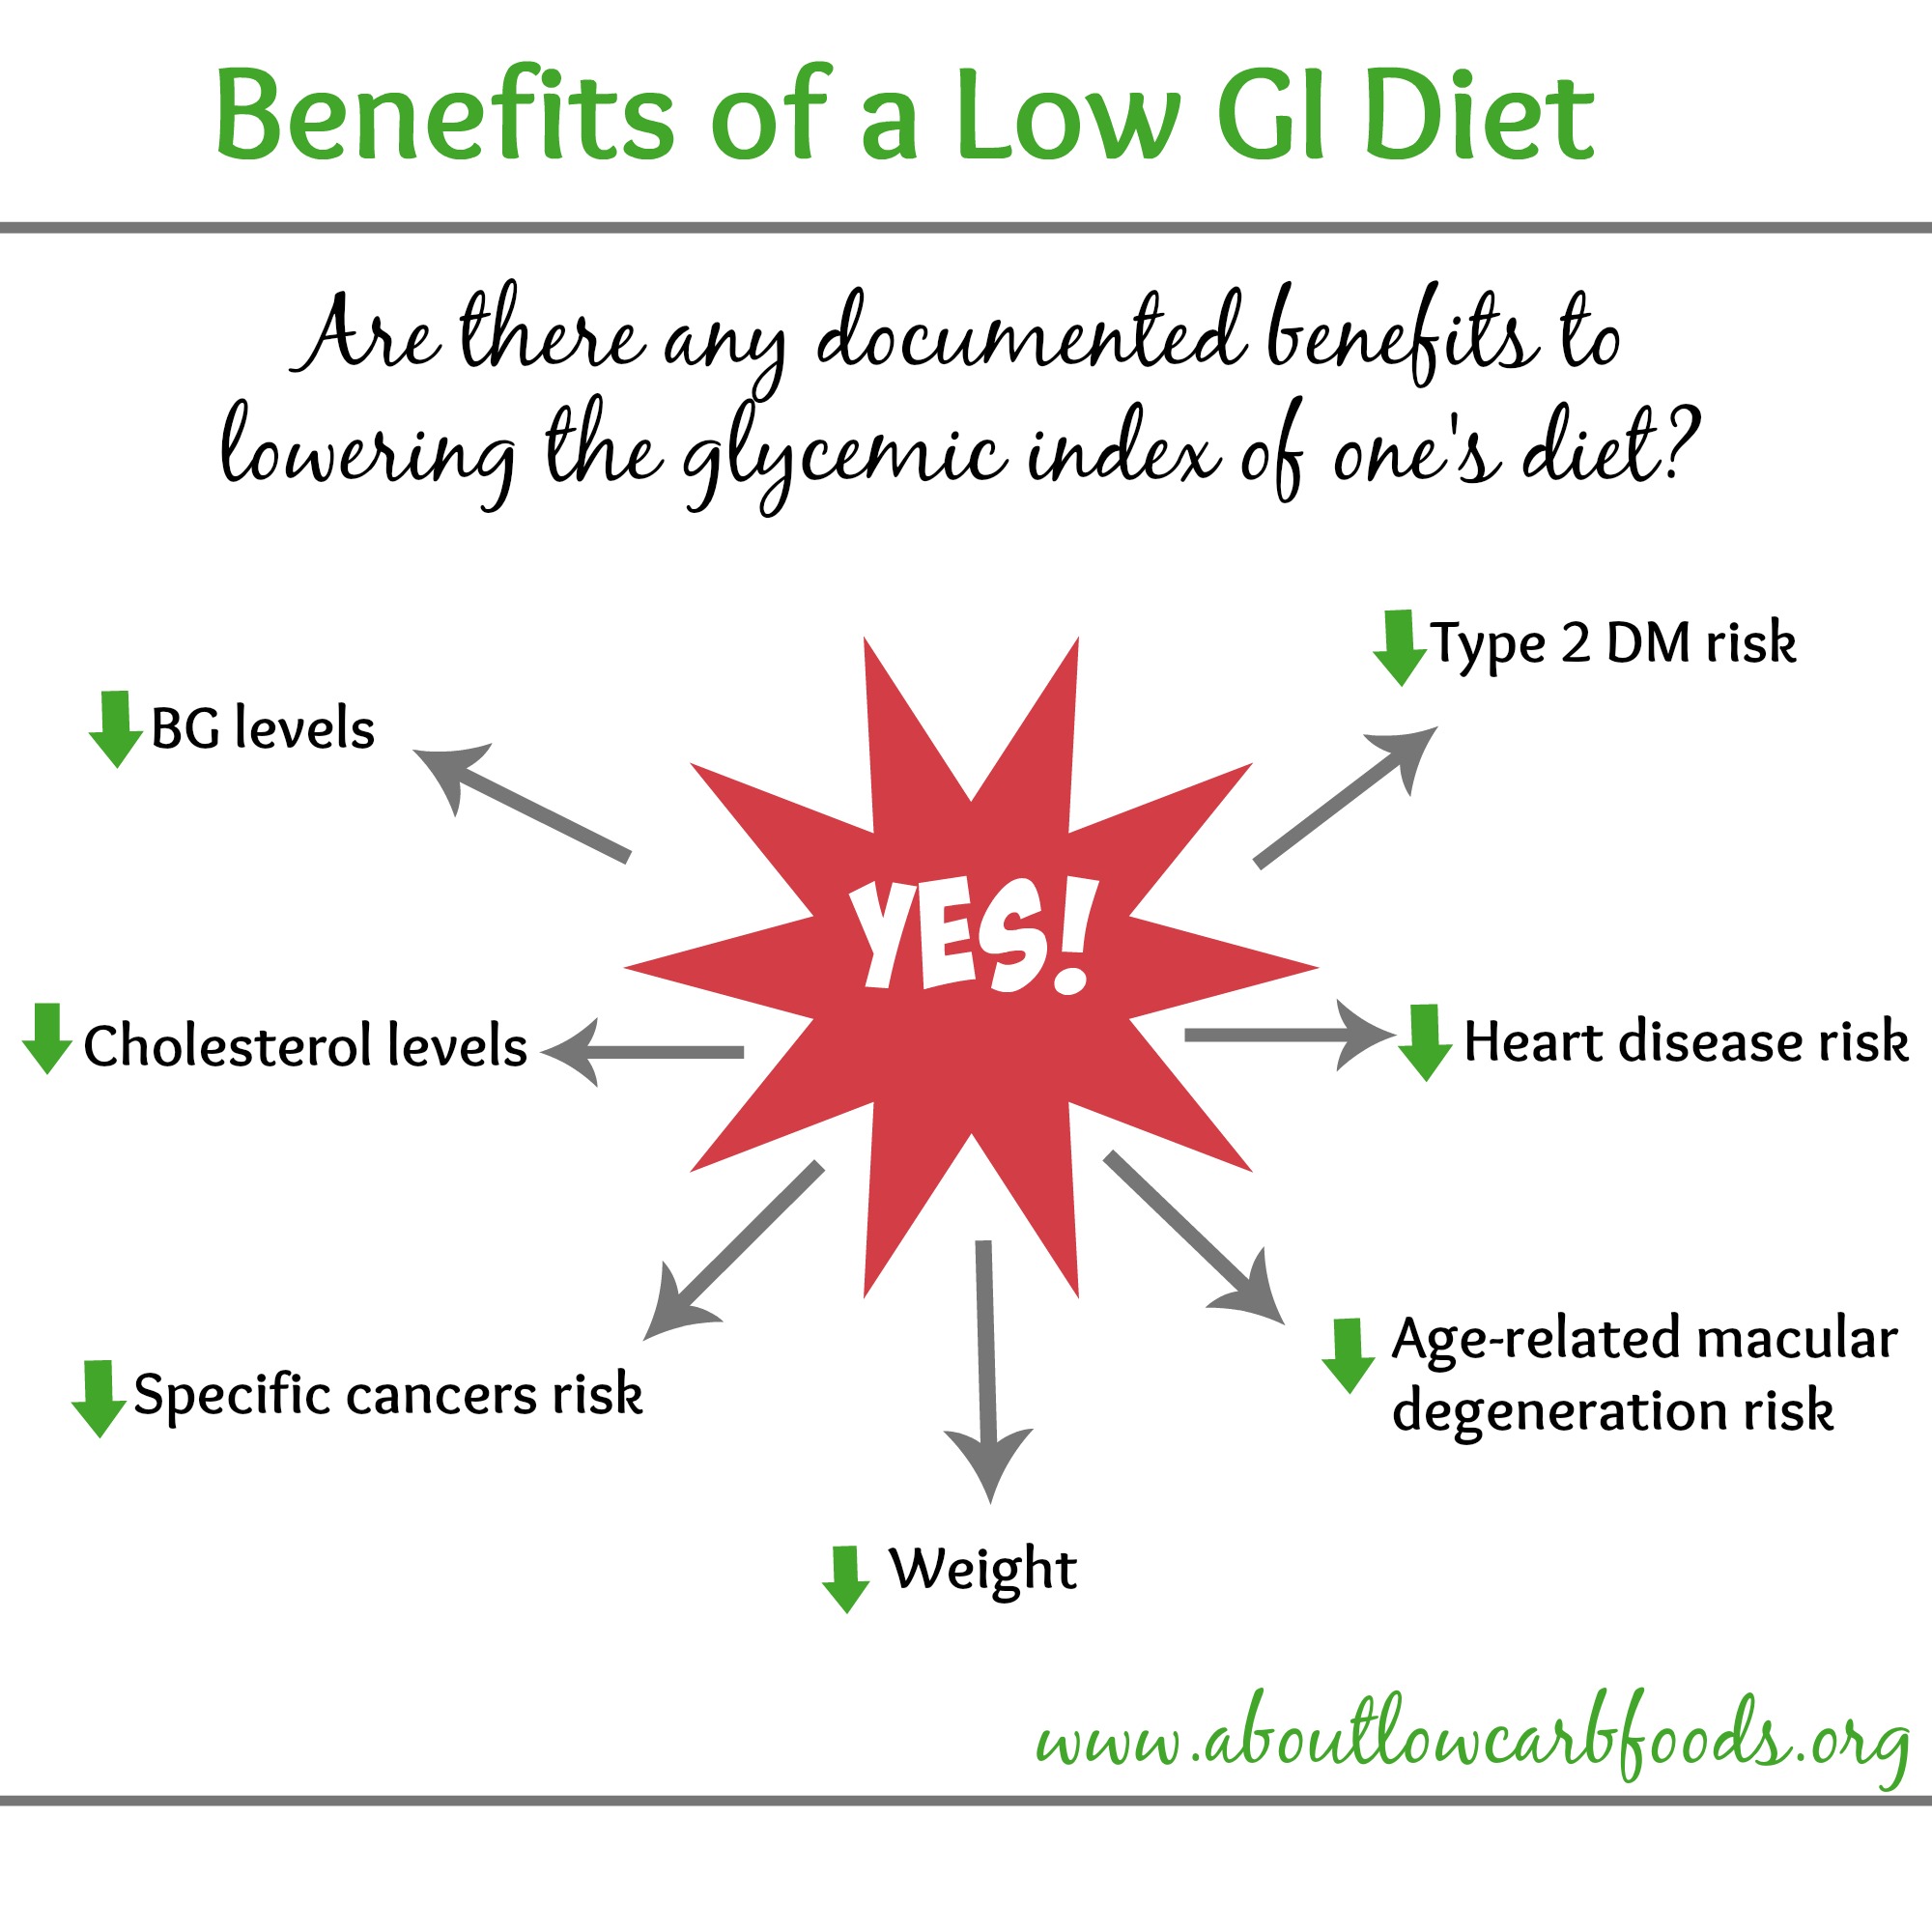 What is a low glycemic diet?